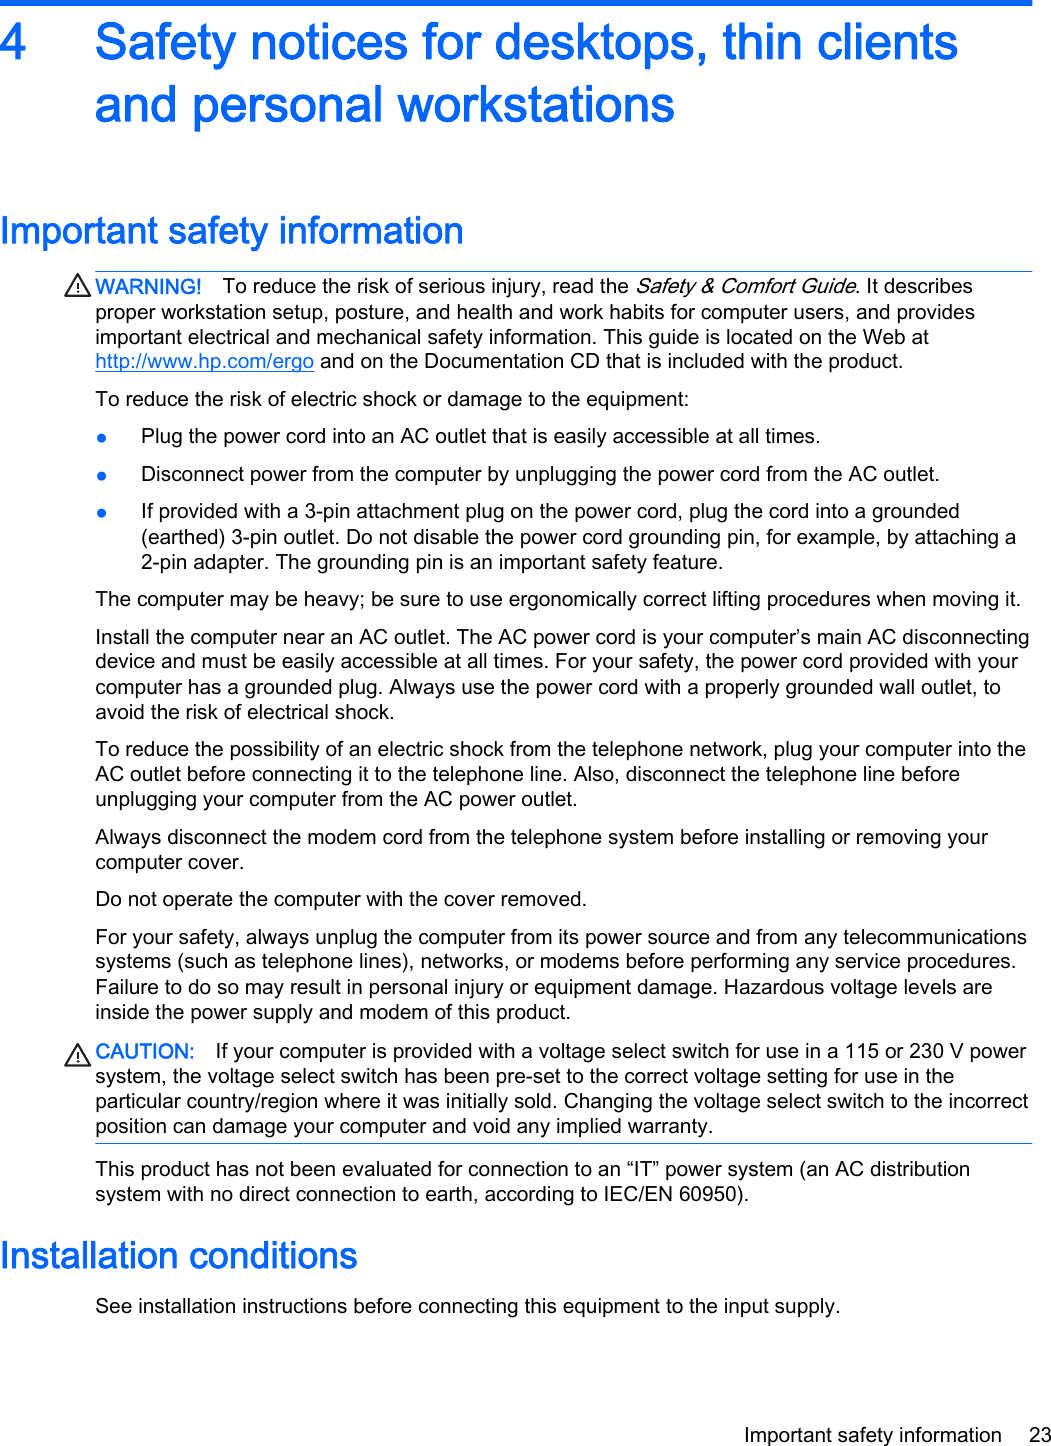 4 Safety notices for desktops, thin clientsand personal workstationsImportant safety informationWARNING! To reduce the risk of serious injury, read the Safety &amp; Comfort Guide. It describesproper workstation setup, posture, and health and work habits for computer users, and providesimportant electrical and mechanical safety information. This guide is located on the Web athttp://www.hp.com/ergo and on the Documentation CD that is included with the product.To reduce the risk of electric shock or damage to the equipment:●Plug the power cord into an AC outlet that is easily accessible at all times.●Disconnect power from the computer by unplugging the power cord from the AC outlet.●If provided with a 3-pin attachment plug on the power cord, plug the cord into a grounded(earthed) 3-pin outlet. Do not disable the power cord grounding pin, for example, by attaching a2-pin adapter. The grounding pin is an important safety feature.The computer may be heavy; be sure to use ergonomically correct lifting procedures when moving it.Install the computer near an AC outlet. The AC power cord is your computer’s main AC disconnectingdevice and must be easily accessible at all times. For your safety, the power cord provided with yourcomputer has a grounded plug. Always use the power cord with a properly grounded wall outlet, toavoid the risk of electrical shock.To reduce the possibility of an electric shock from the telephone network, plug your computer into theAC outlet before connecting it to the telephone line. Also, disconnect the telephone line beforeunplugging your computer from the AC power outlet.Always disconnect the modem cord from the telephone system before installing or removing yourcomputer cover.Do not operate the computer with the cover removed.For your safety, always unplug the computer from its power source and from any telecommunicationssystems (such as telephone lines), networks, or modems before performing any service procedures.Failure to do so may result in personal injury or equipment damage. Hazardous voltage levels areinside the power supply and modem of this product.CAUTION: If your computer is provided with a voltage select switch for use in a 115 or 230 V powersystem, the voltage select switch has been pre-set to the correct voltage setting for use in theparticular country/region where it was initially sold. Changing the voltage select switch to the incorrectposition can damage your computer and void any implied warranty.This product has not been evaluated for connection to an “IT” power system (an AC distributionsystem with no direct connection to earth, according to IEC/EN 60950).Installation conditionsSee installation instructions before connecting this equipment to the input supply.Important safety information 23